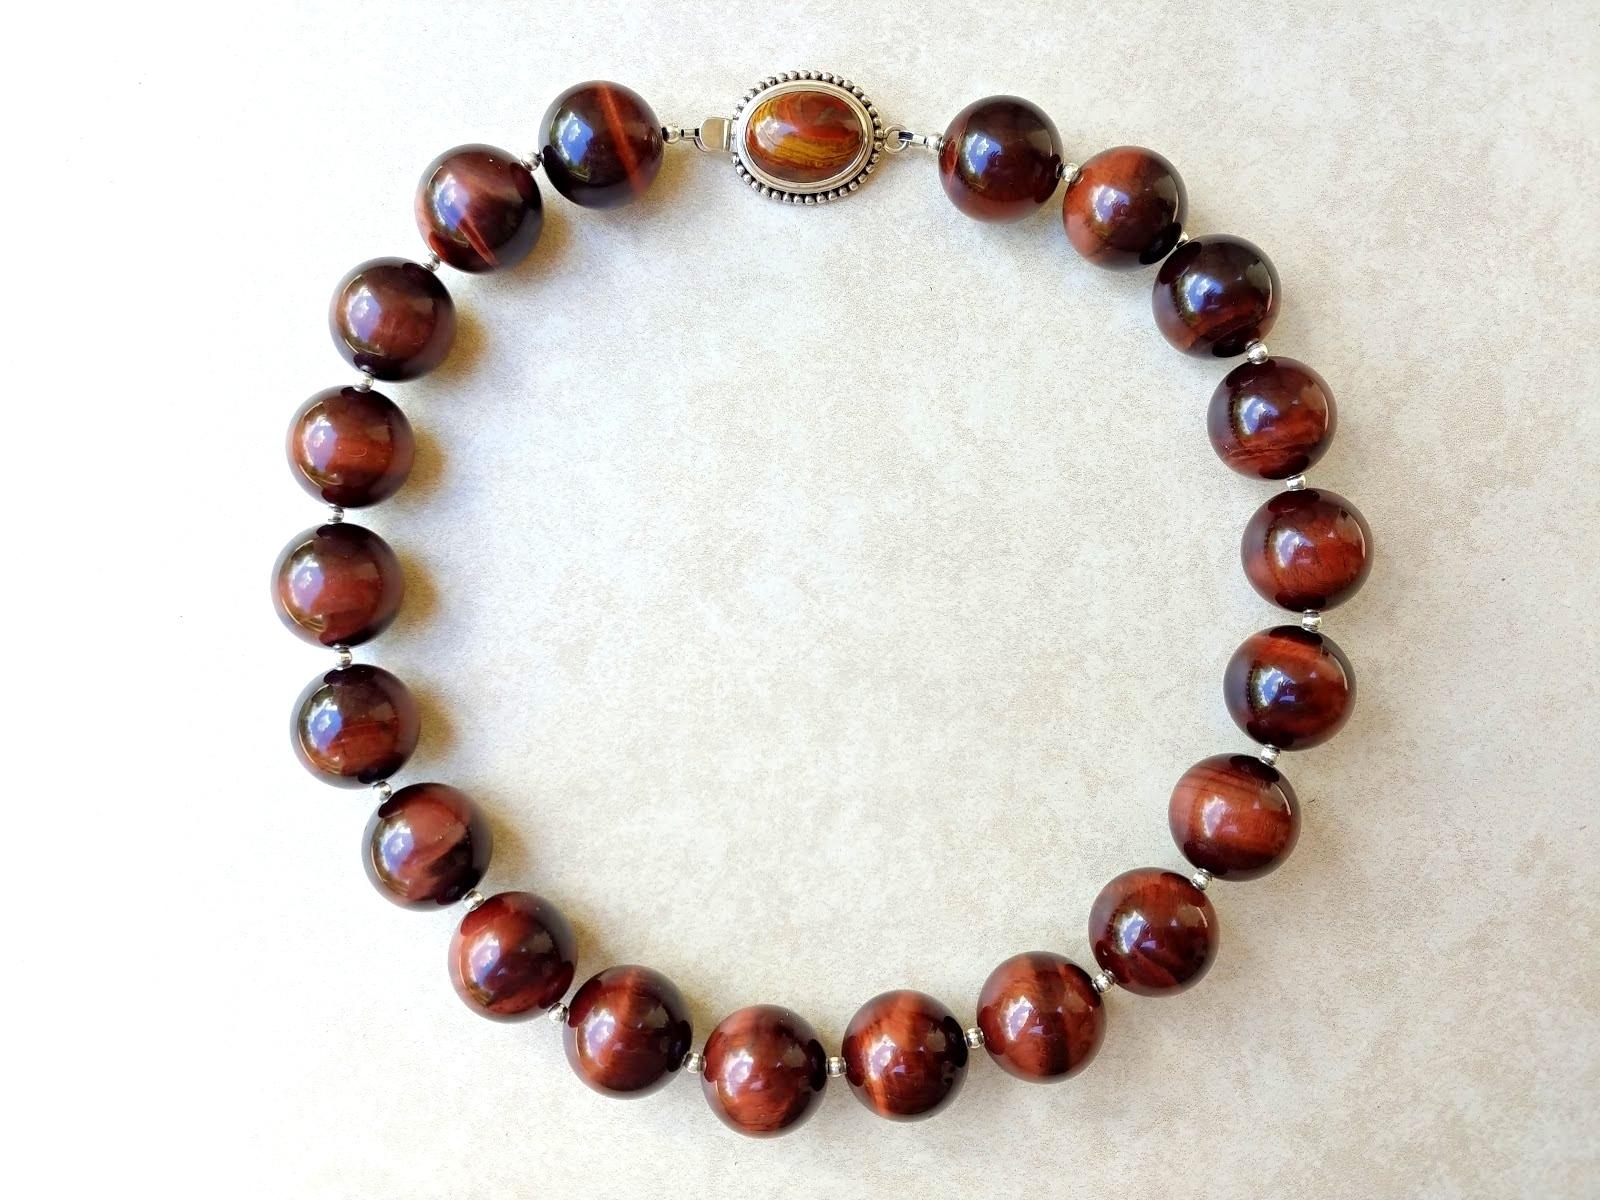 The length of the necklace is 18.5 inches (47 cm). The size of the smooth round beads is 20 mm. The beads are very high quality.
The tones of the beads are a wondrous silky chocolate-red, luxurious — gorgeous, warm shade of autumn.
The tiger eye was